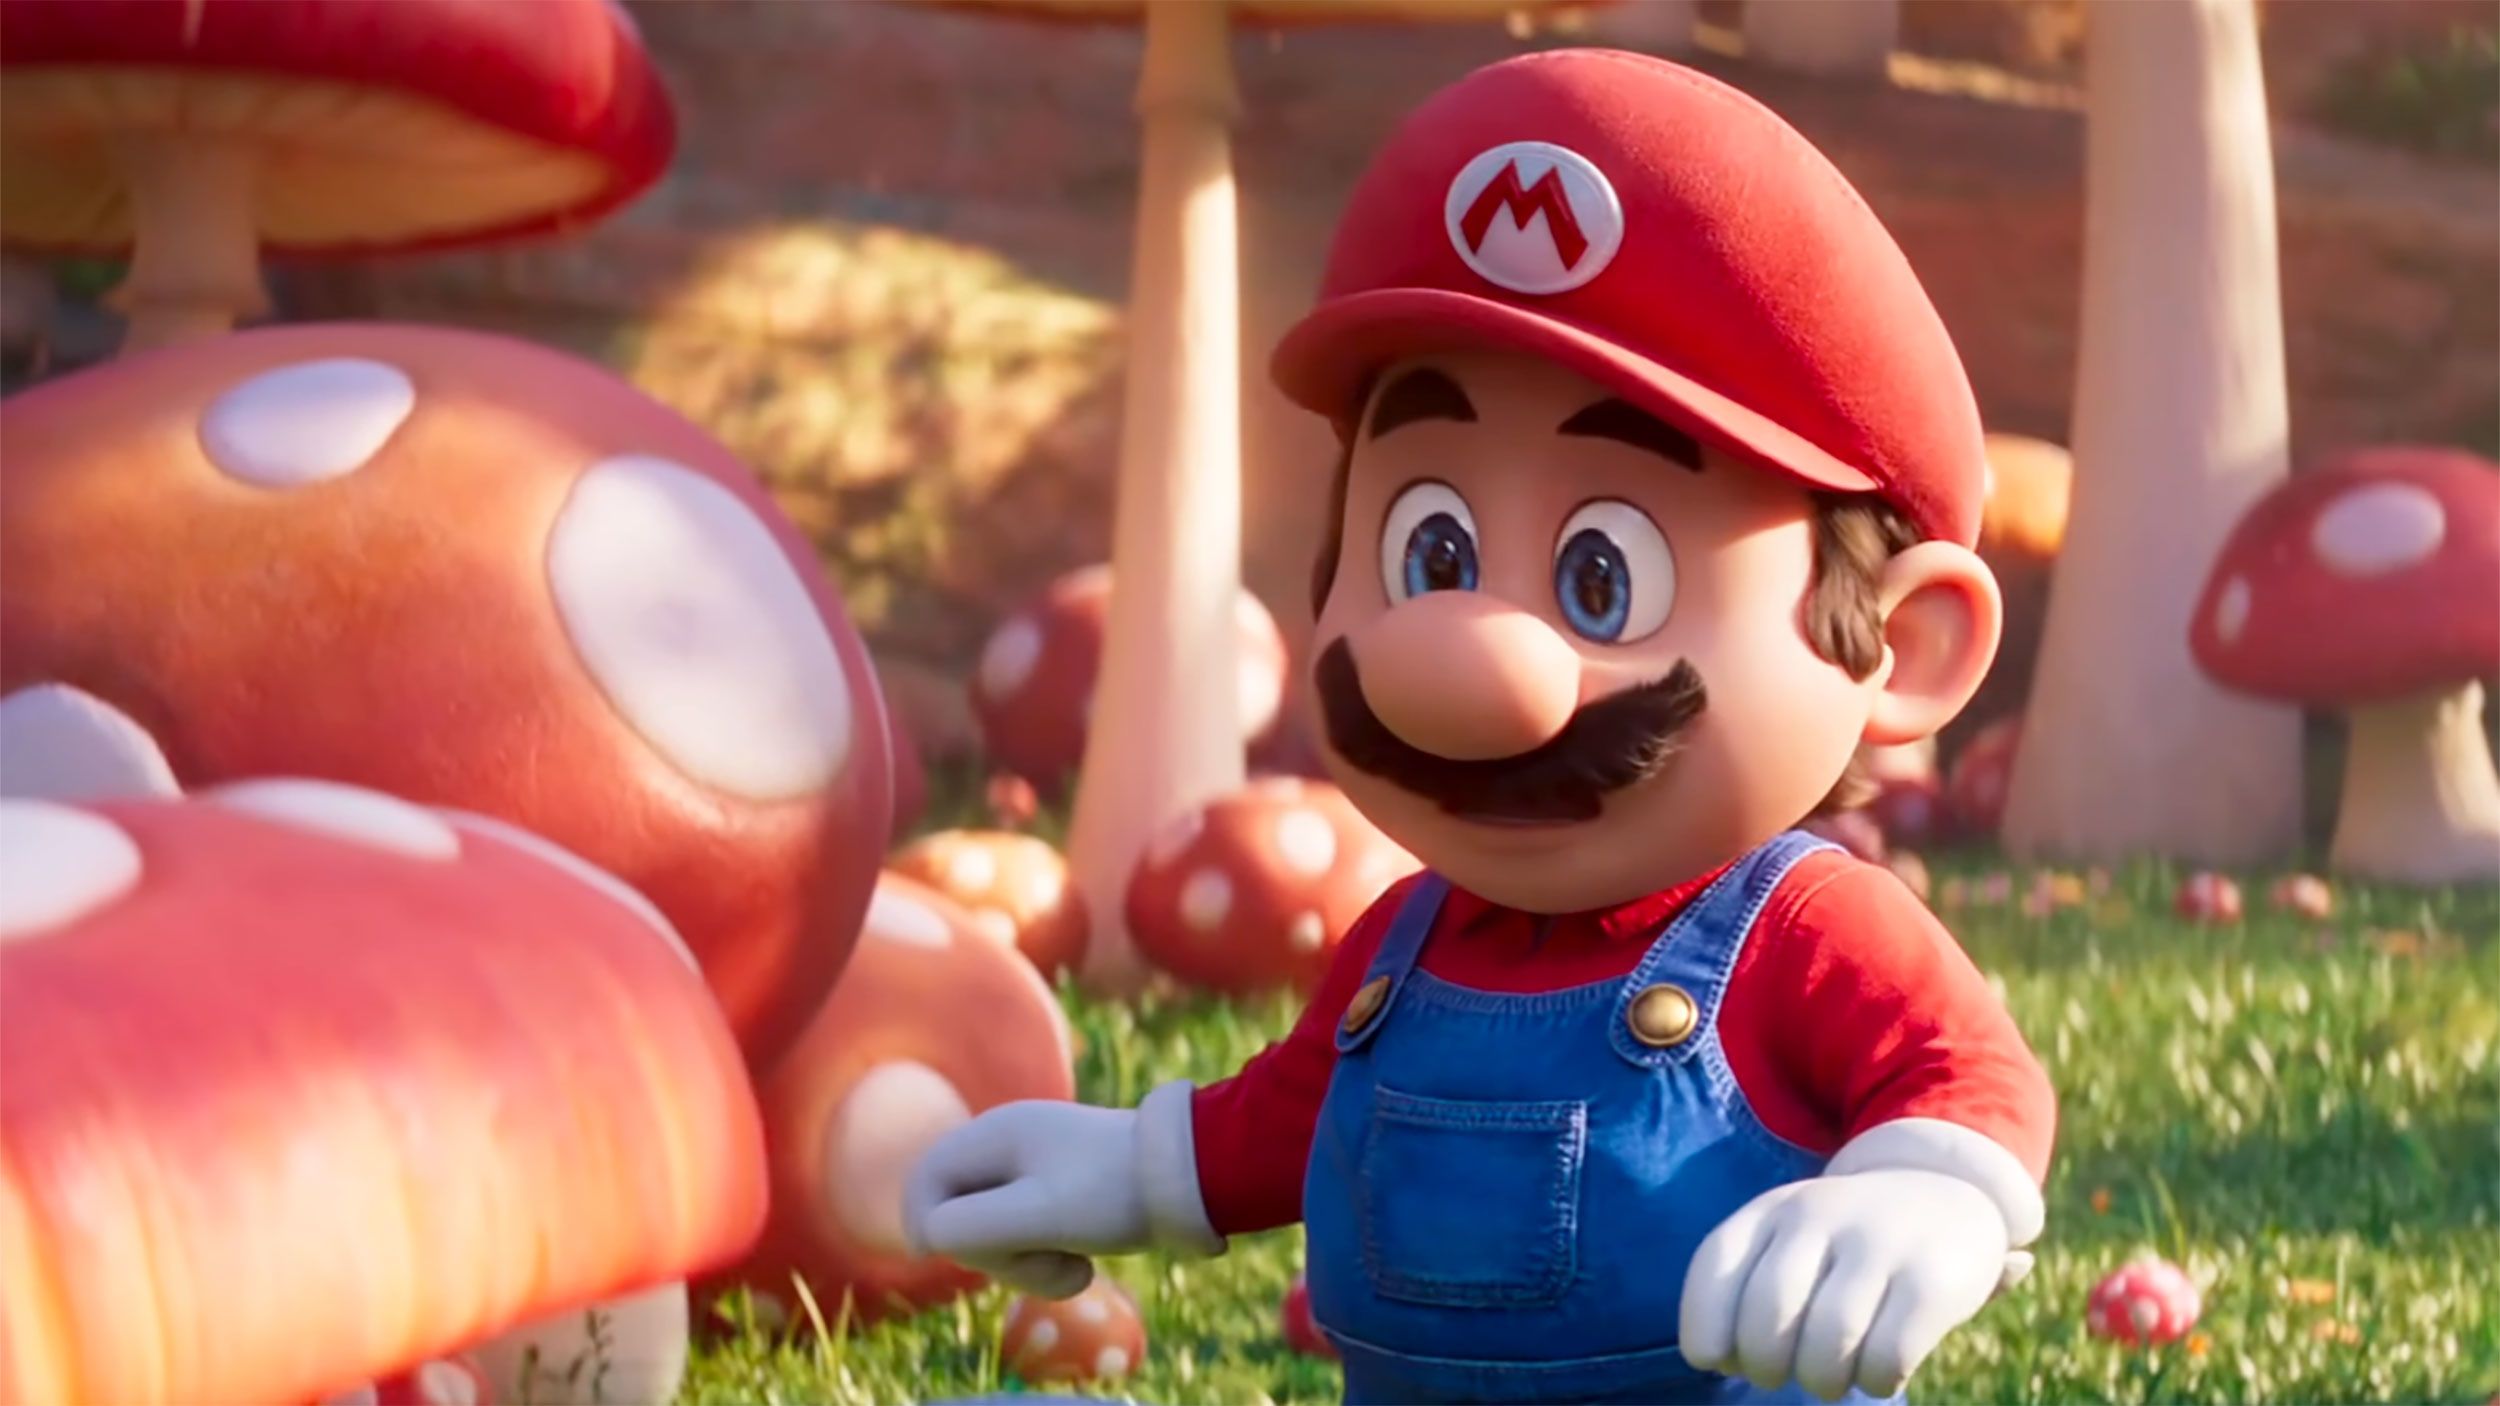 Super Mario Bros Movie 2 Release Date, Preview, Cast, Watch Online, and More